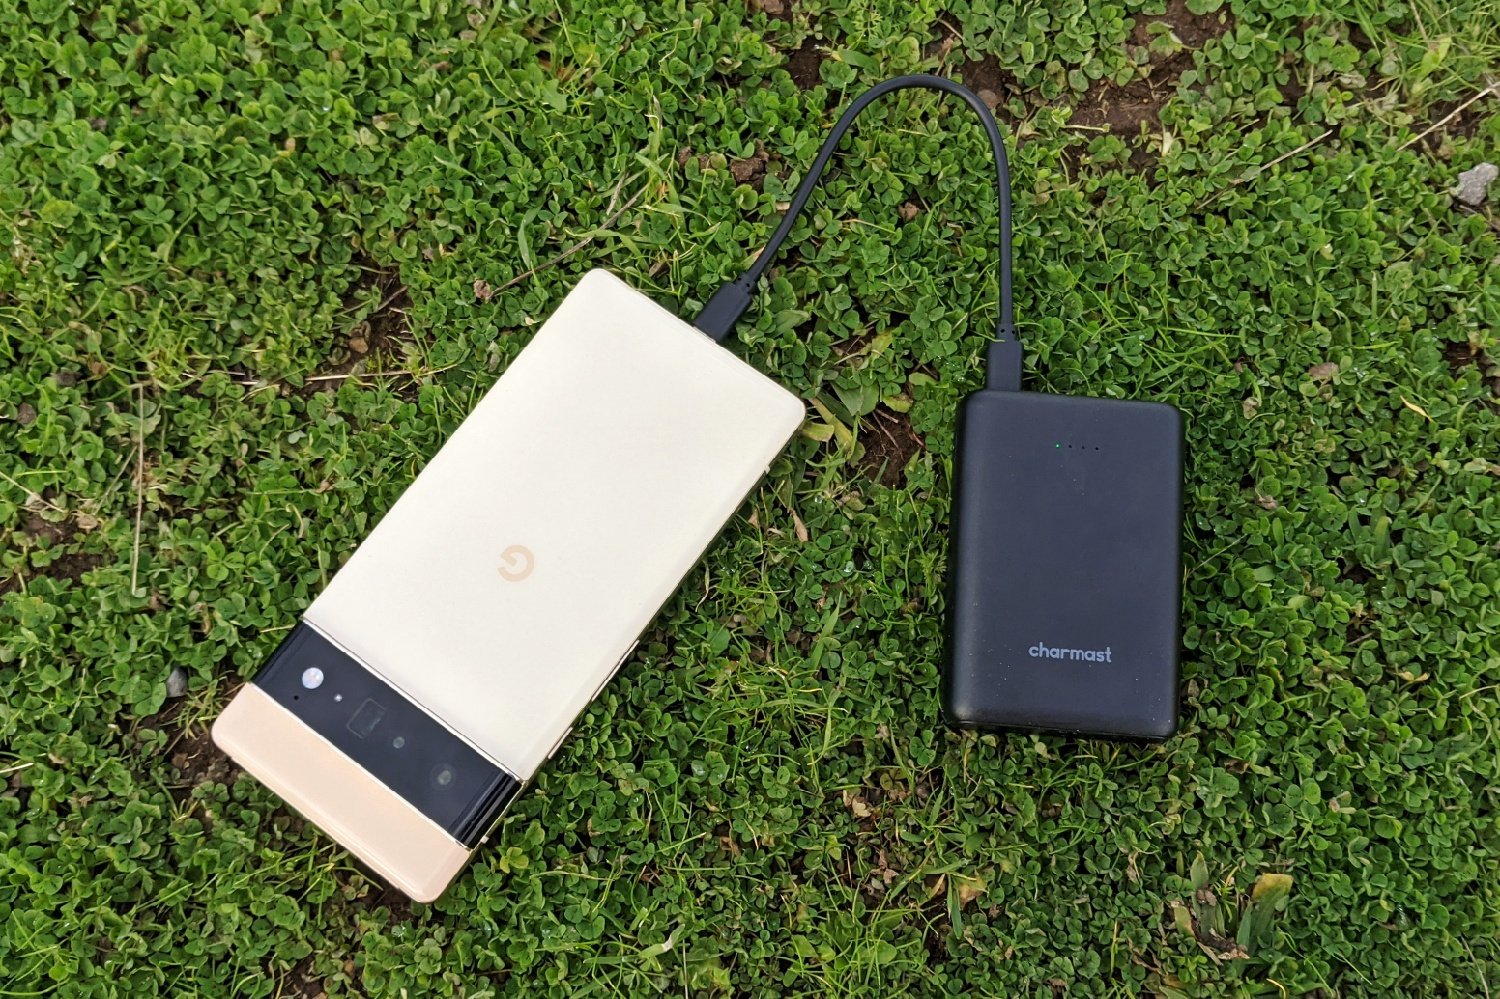 The Charmast 10000 Mini Power Bank plugged into a phone sitting on some grass